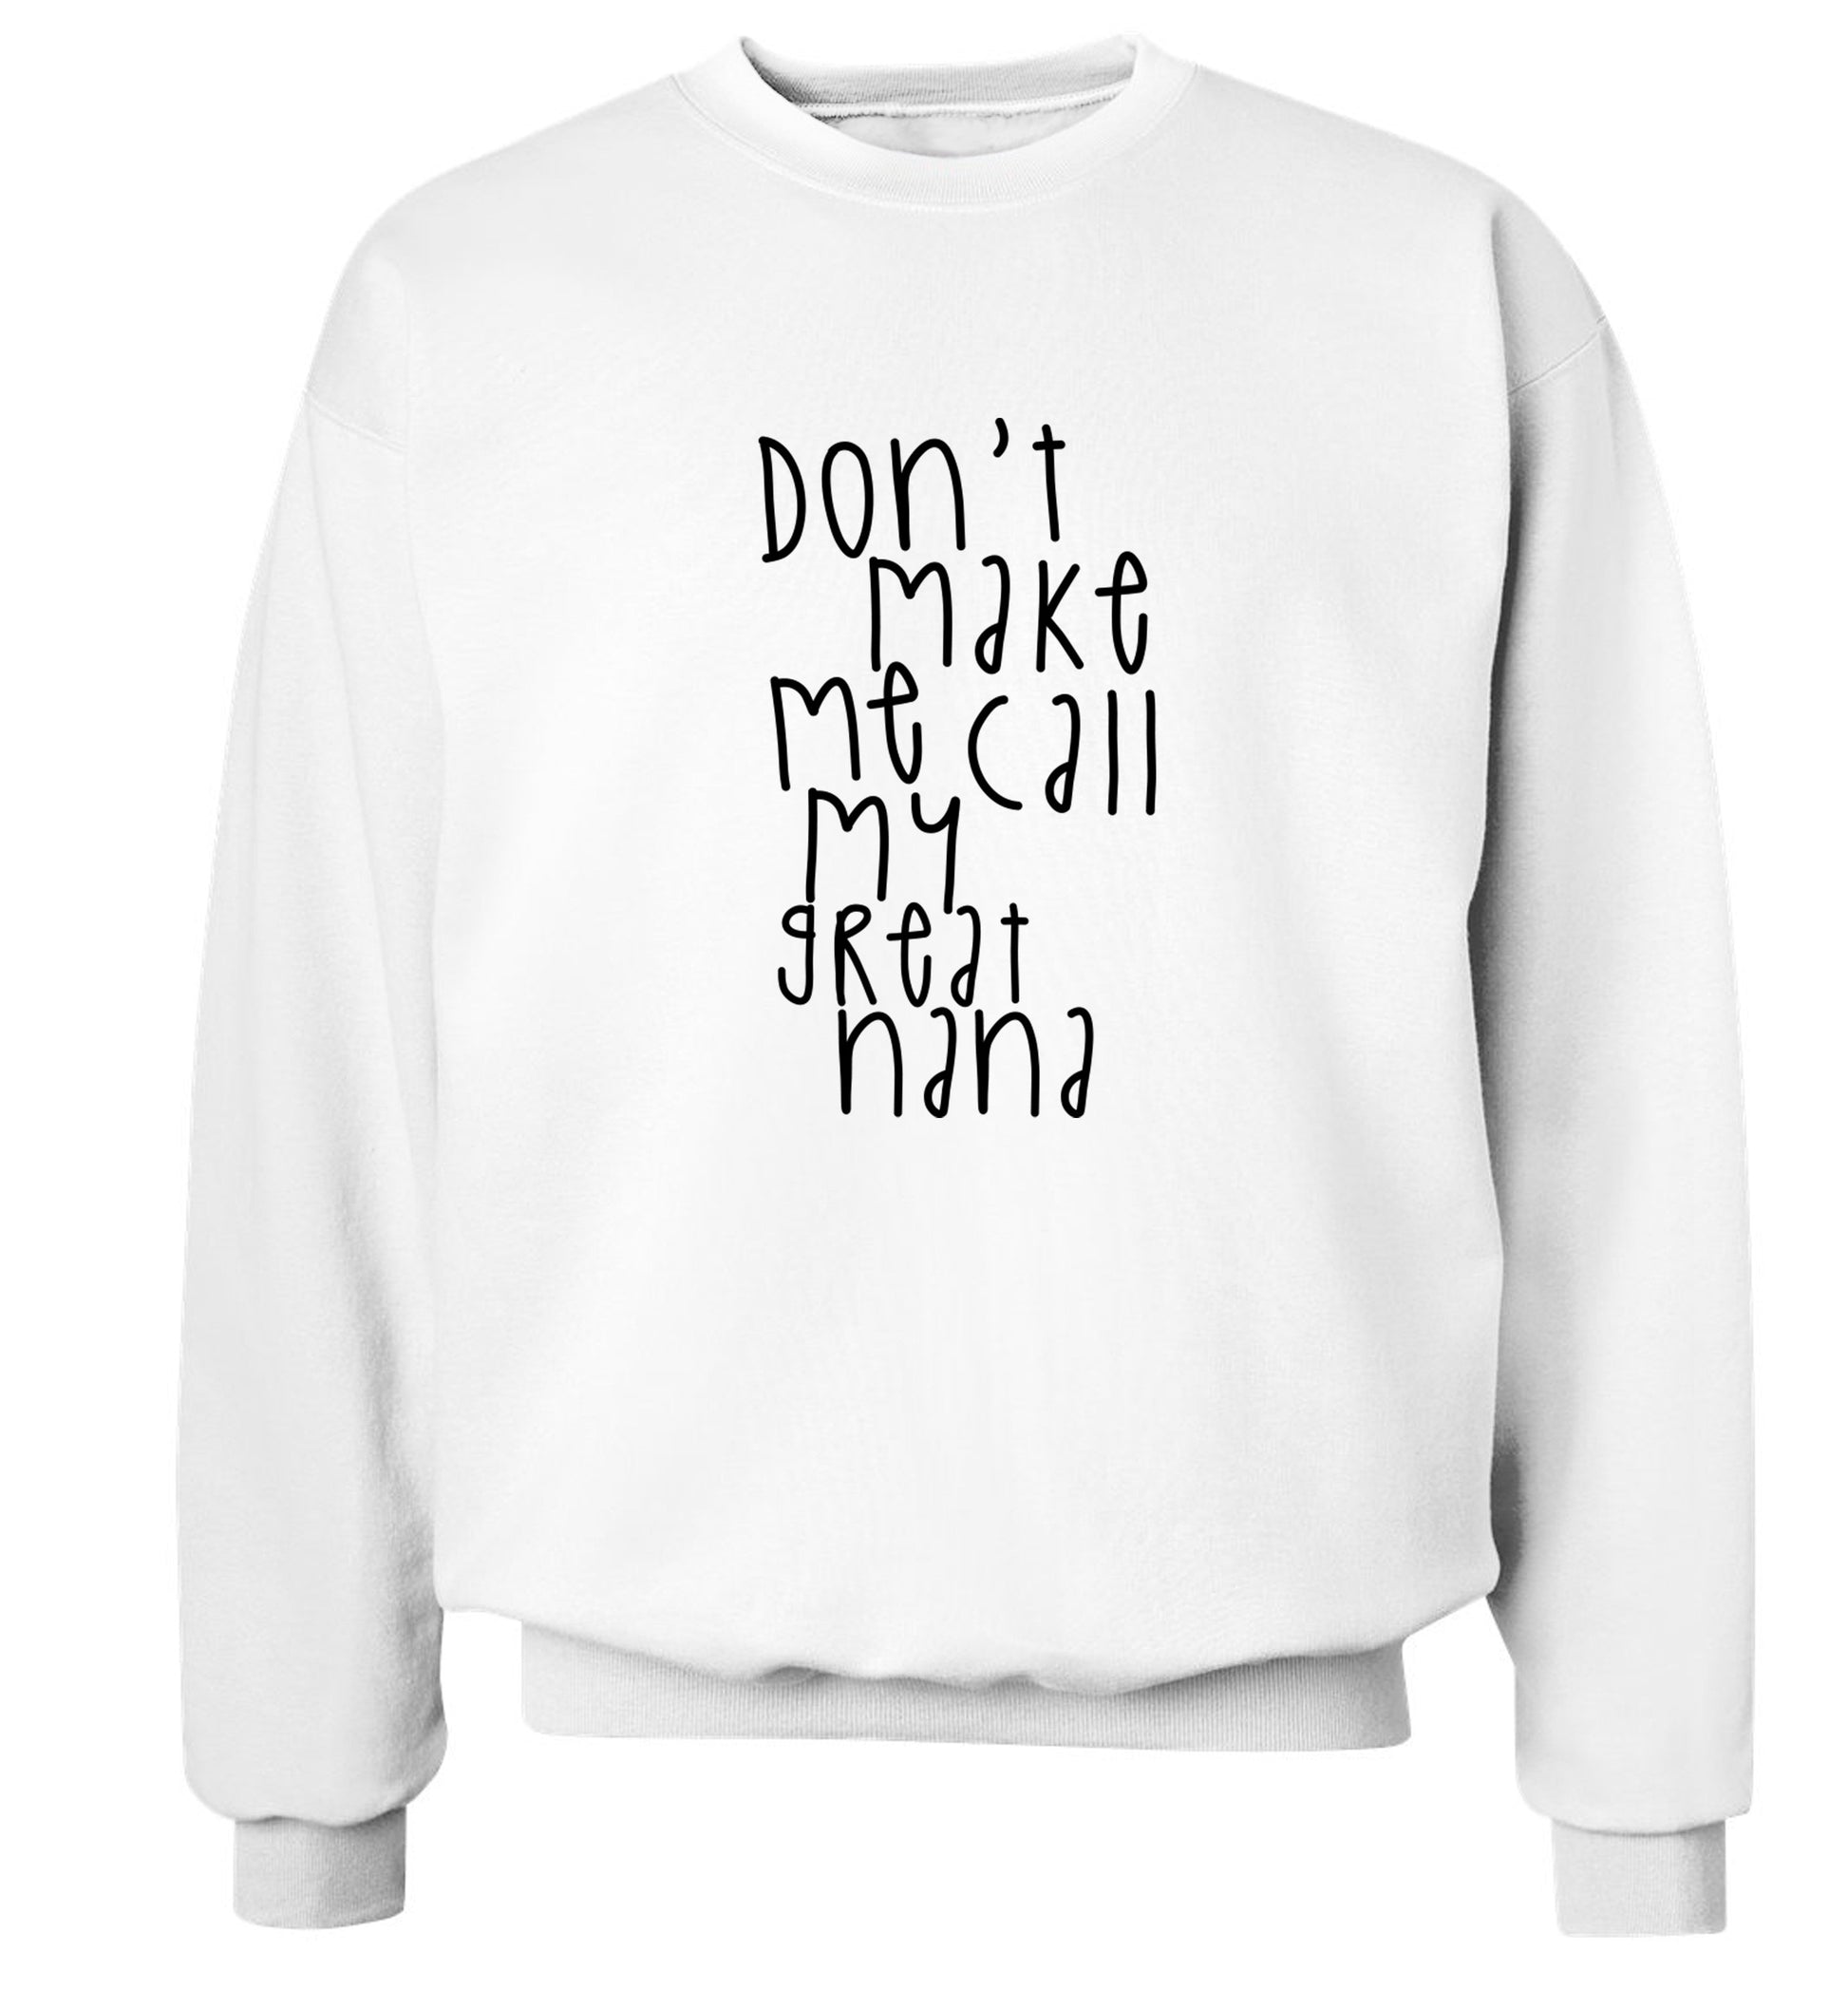 Don't make me call my great nana Adult's unisex white Sweater 2XL